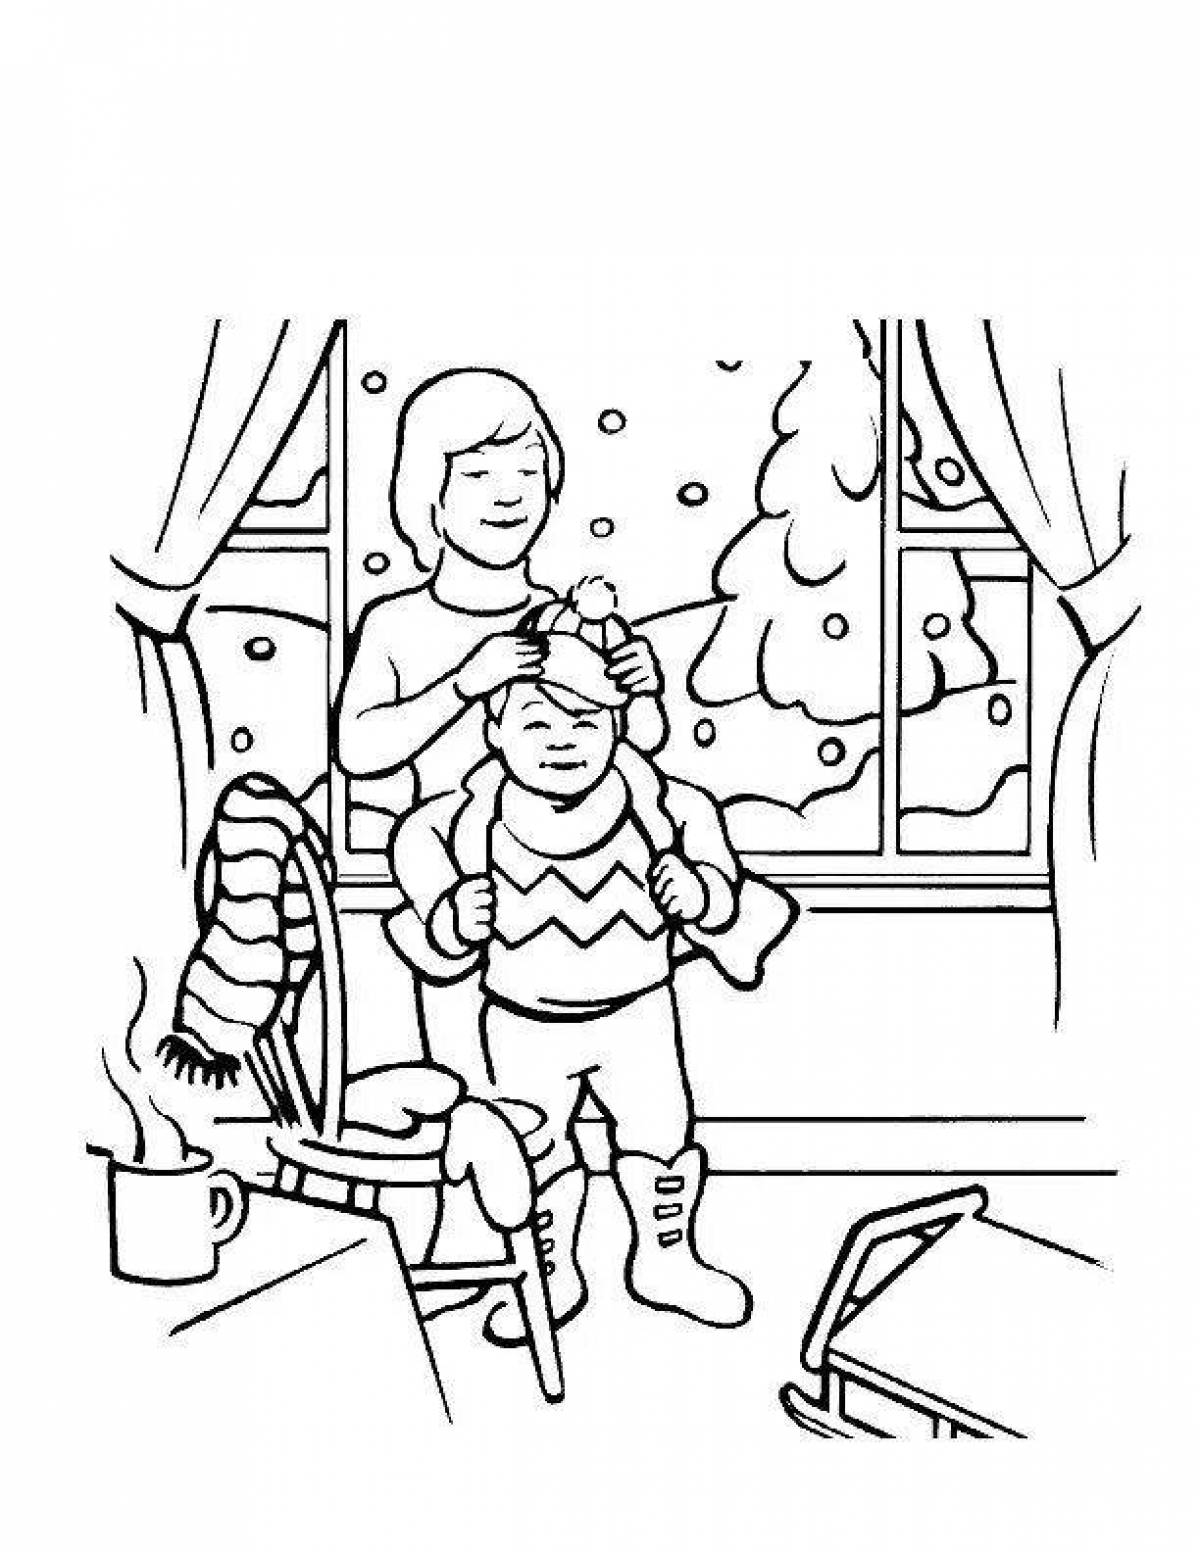 Winter safety fun coloring book